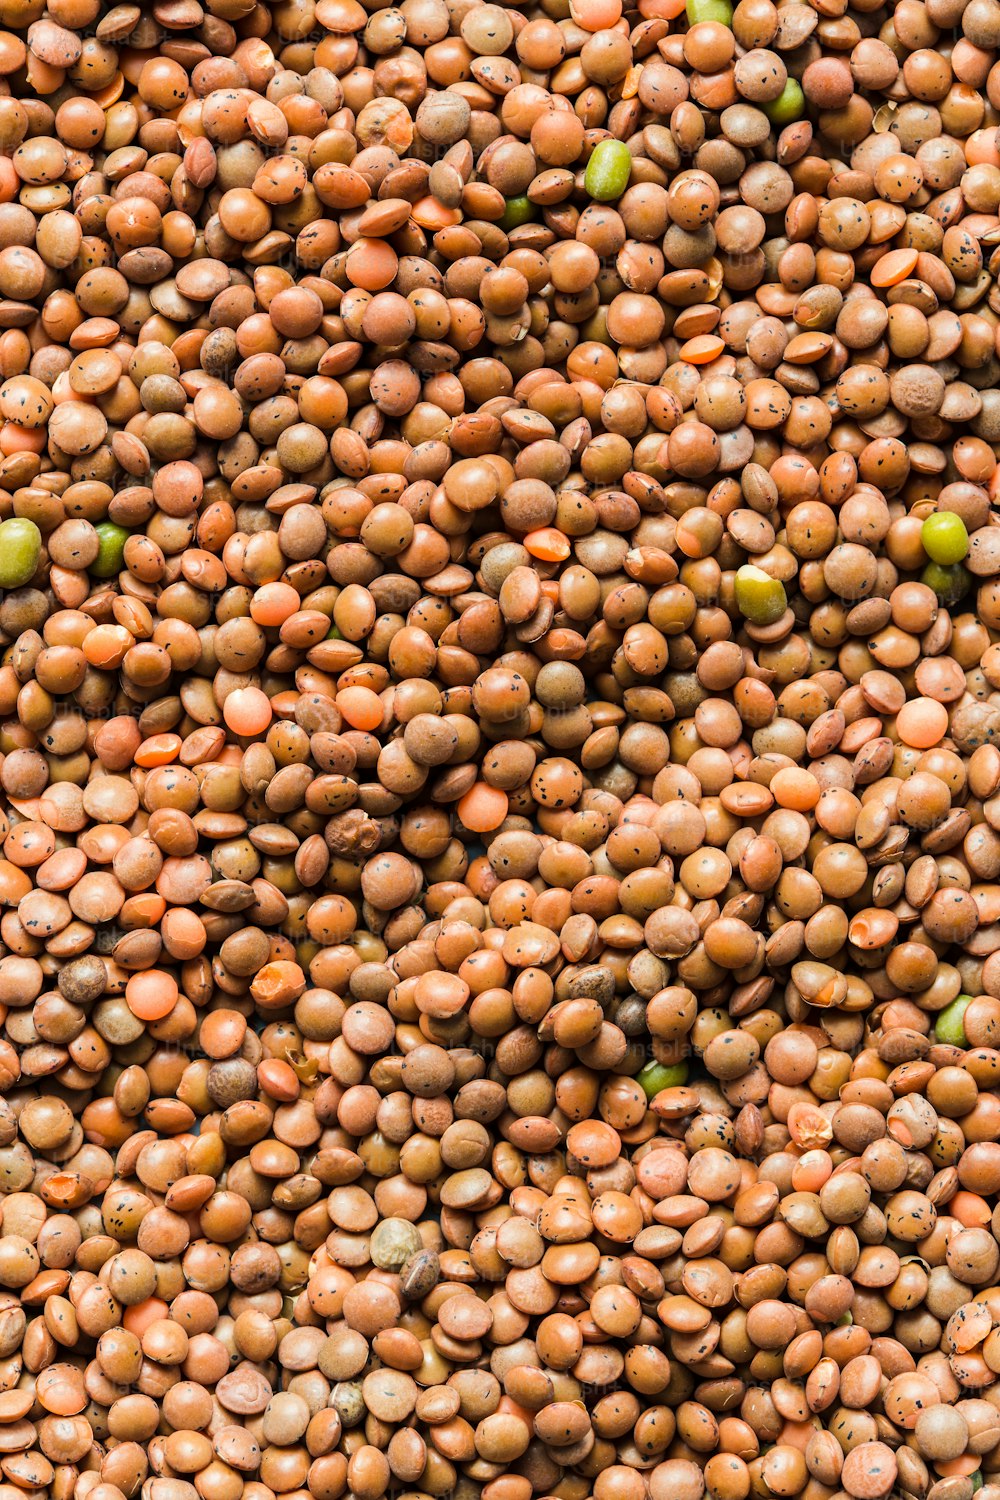 a large pile of beans is shown in this image